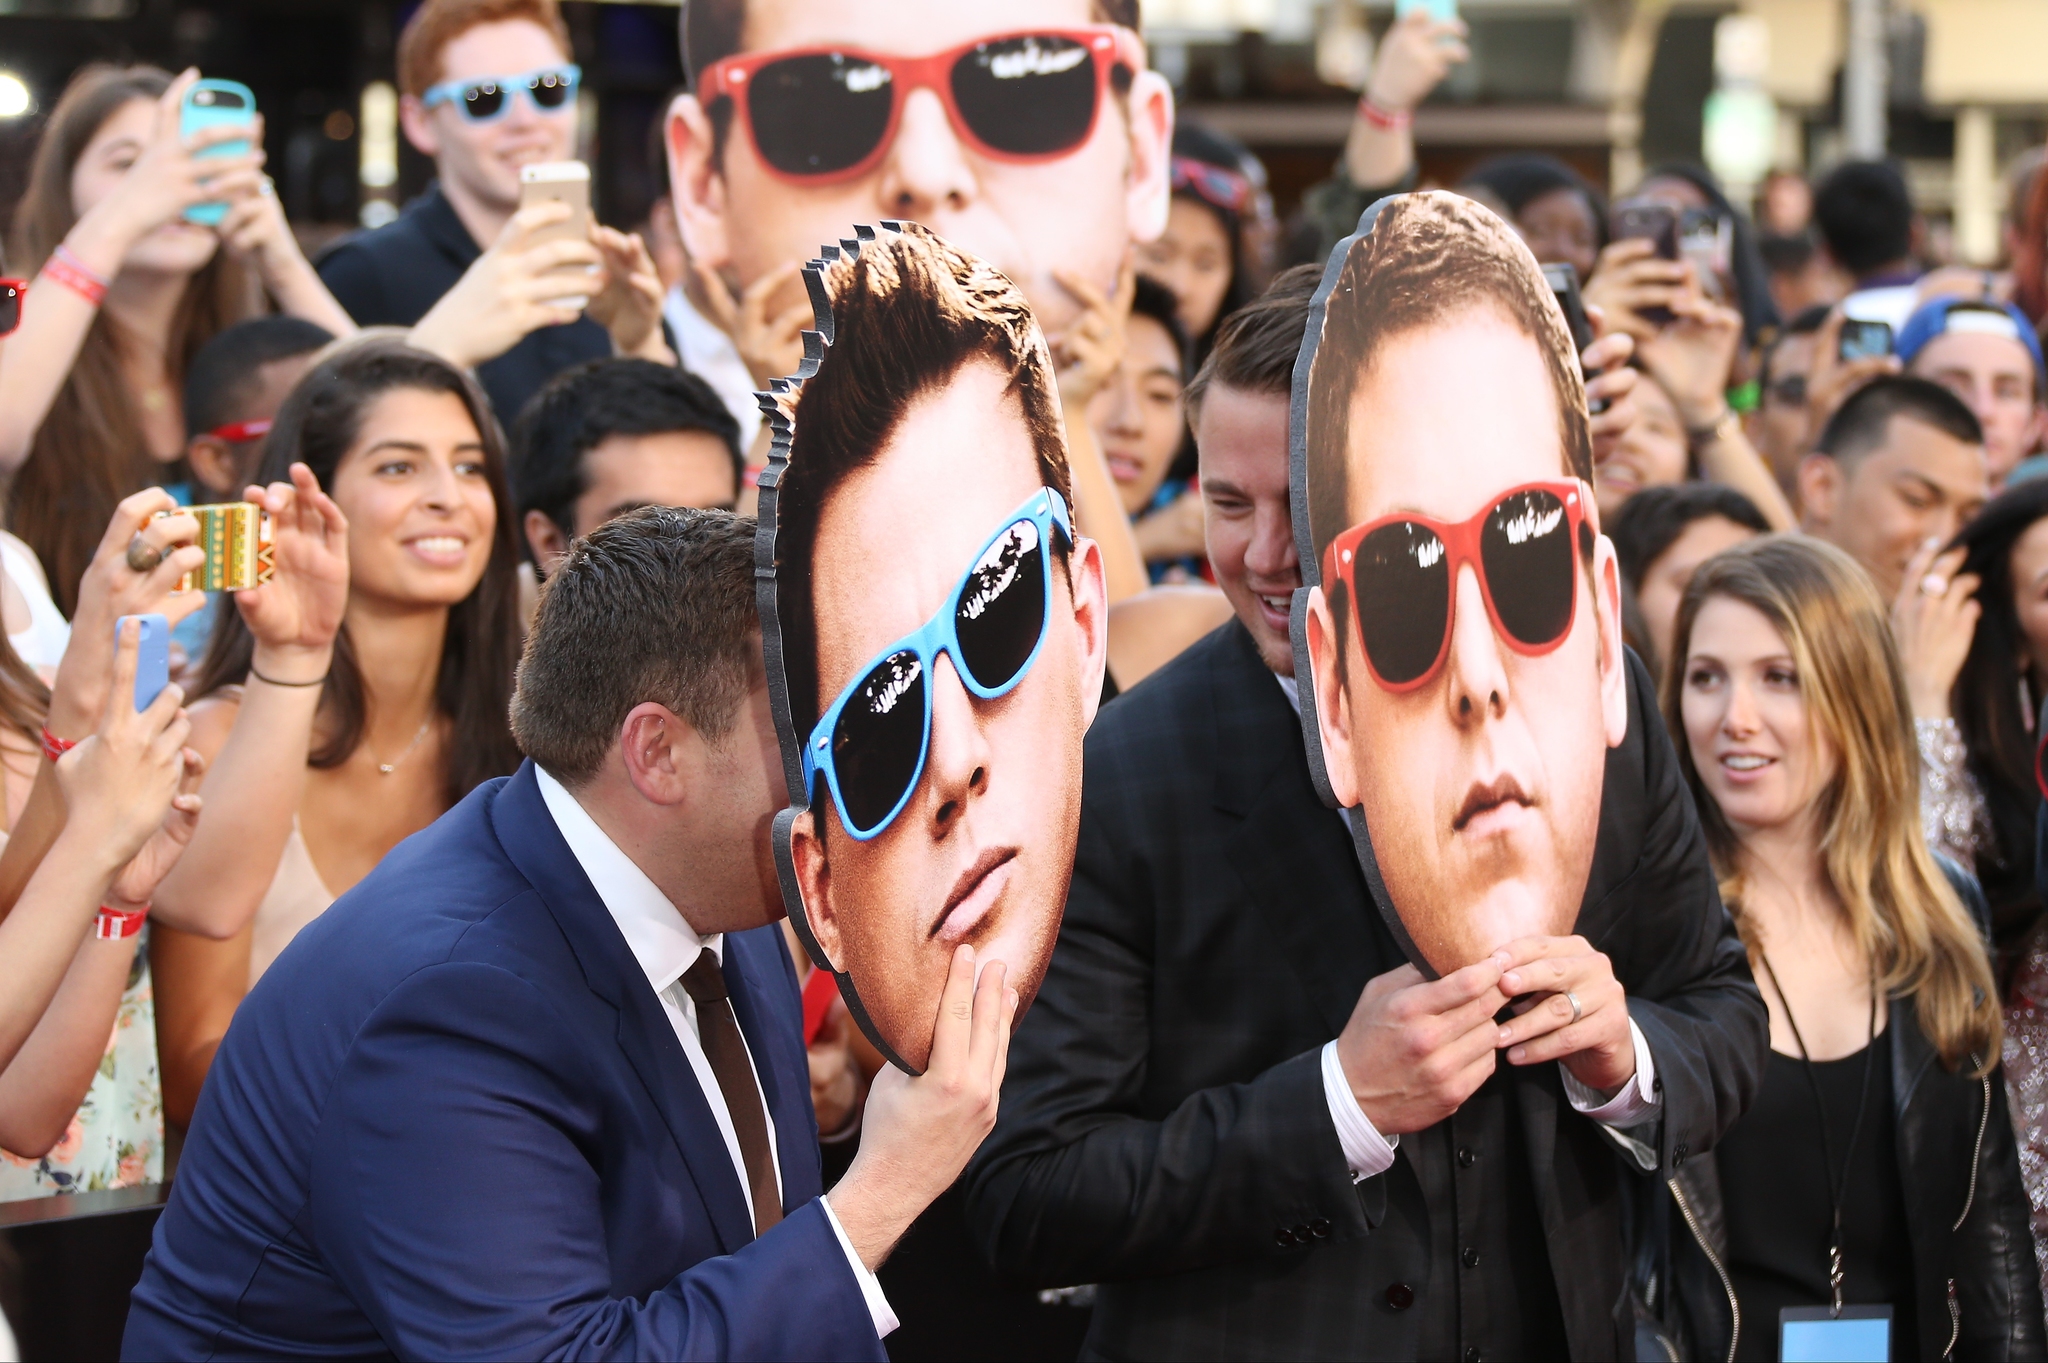 Actors Jonah Hill and Channing Tatum arrive at the Los Angeles premiere of 